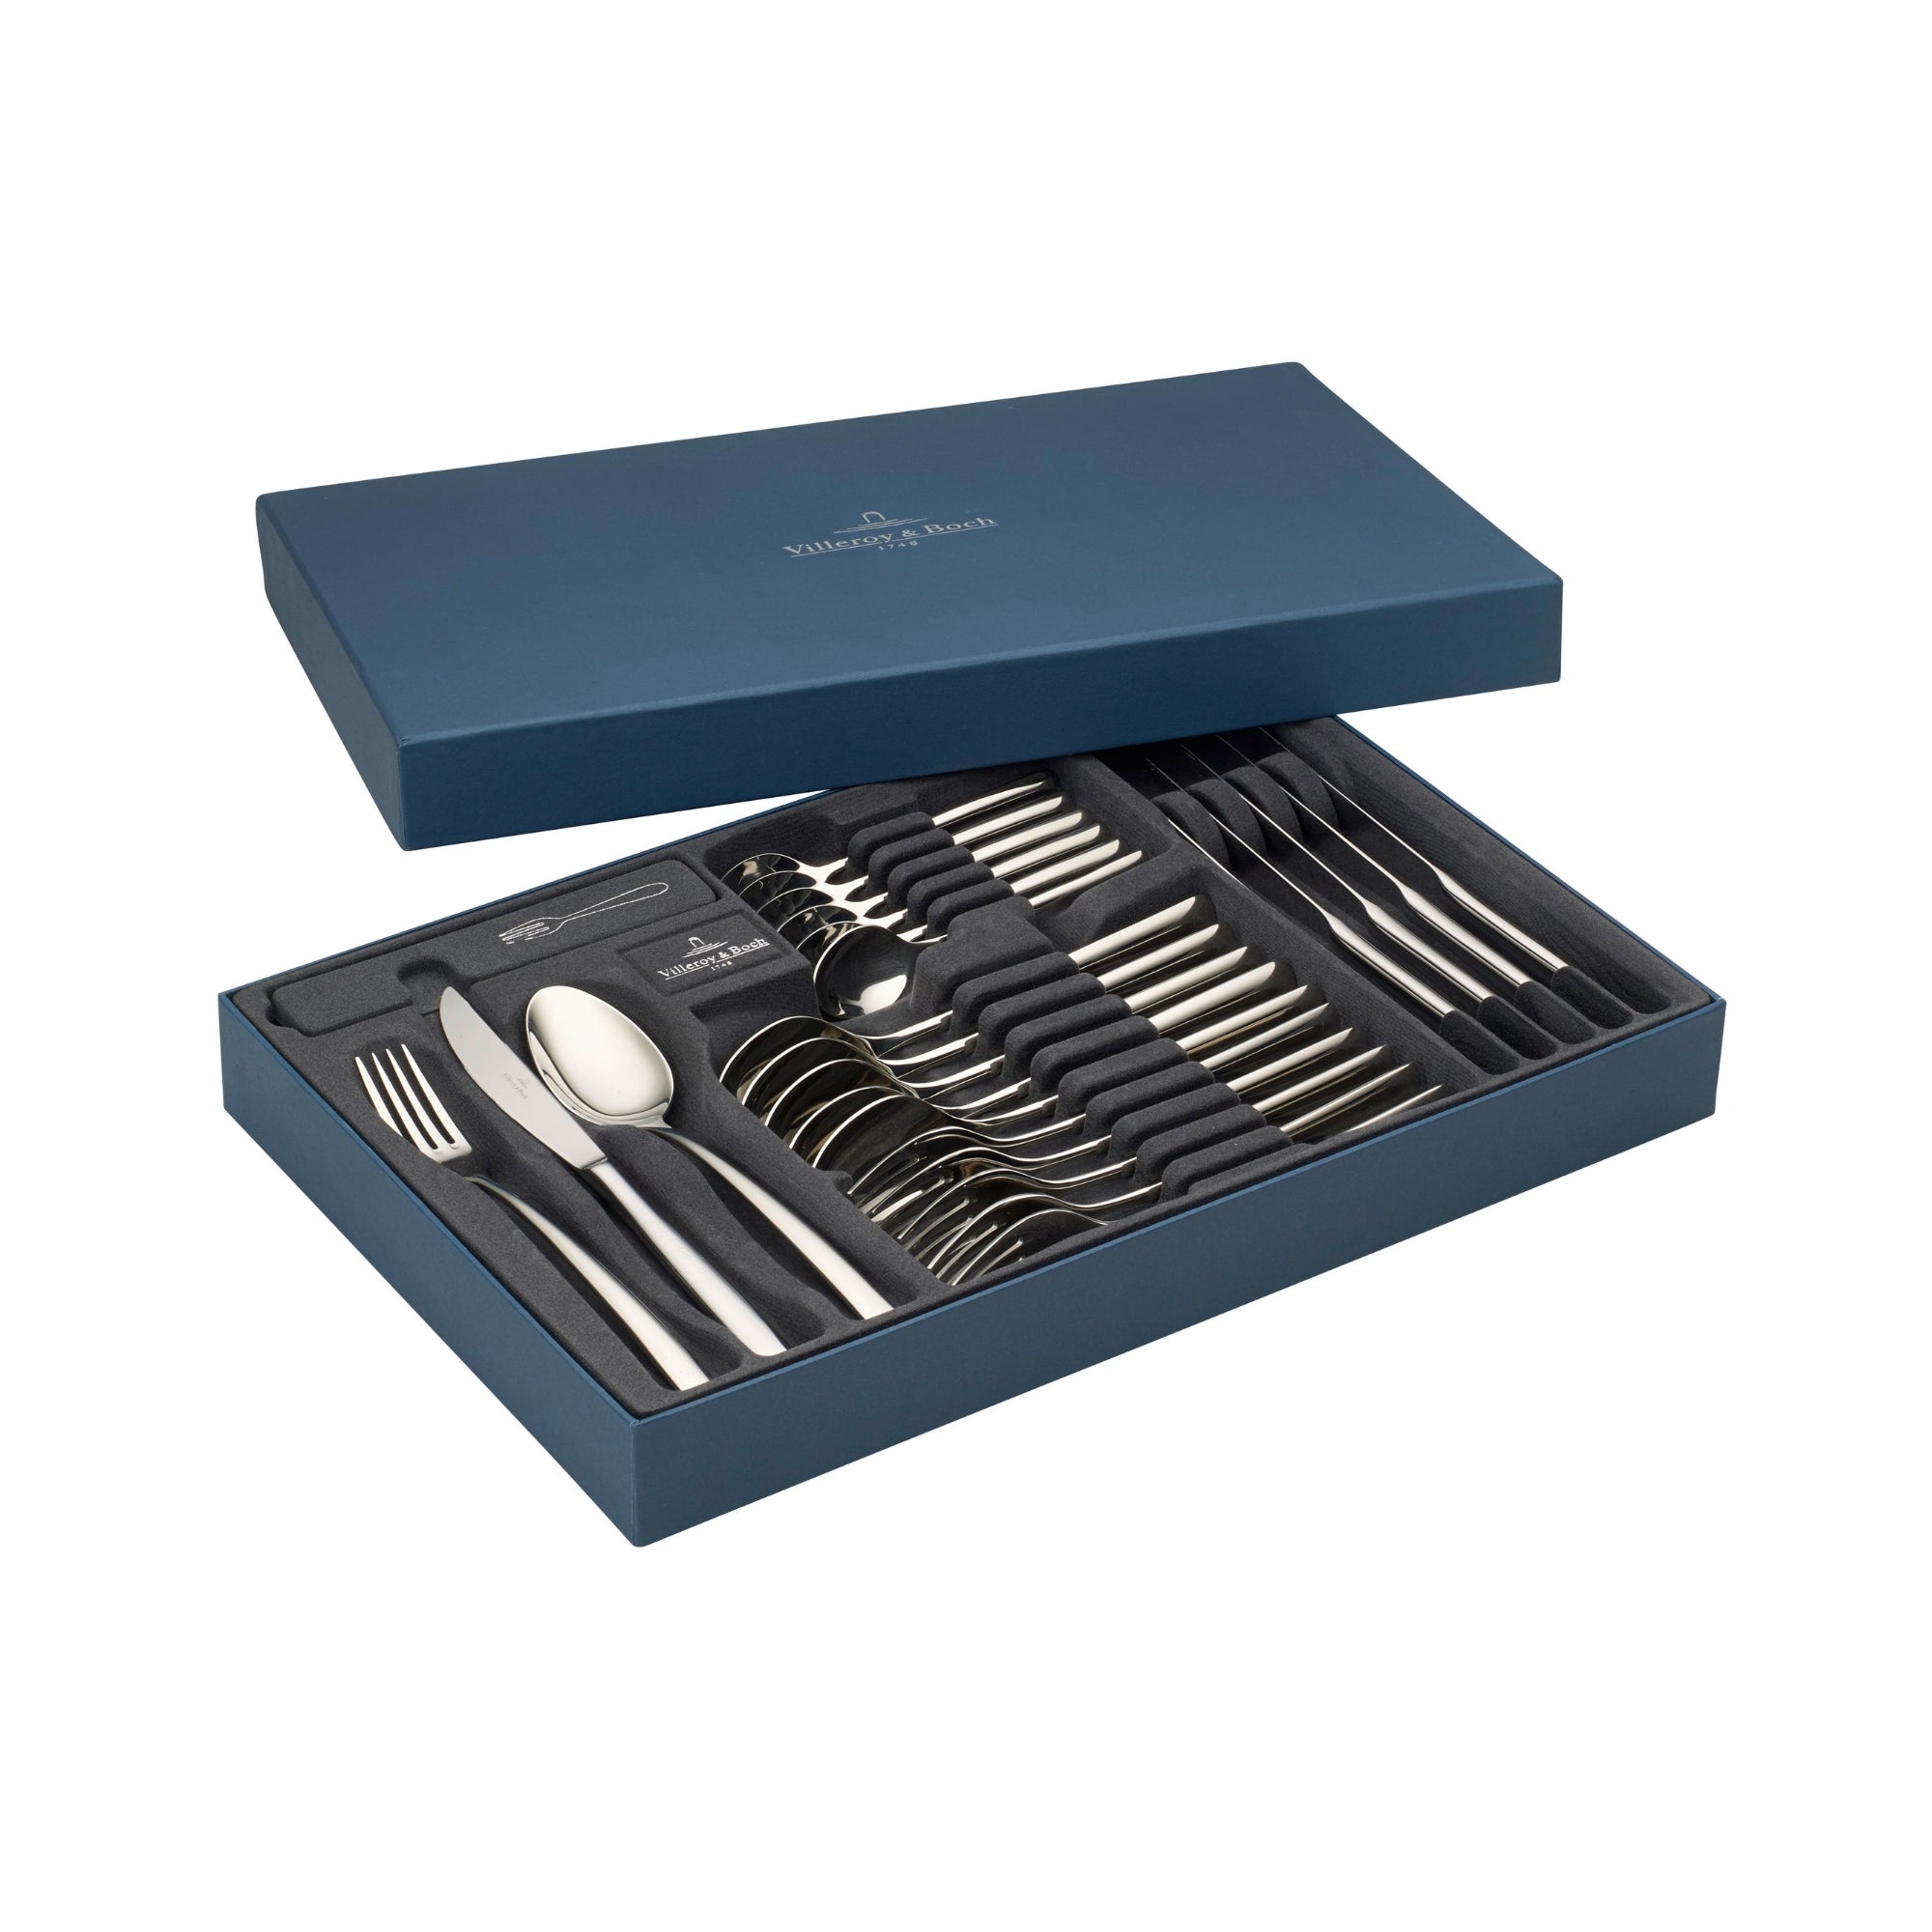 Villeroy &amp; Boch PIEMONT Cutlery Set for 6 people 24 pcs Stainless Steel